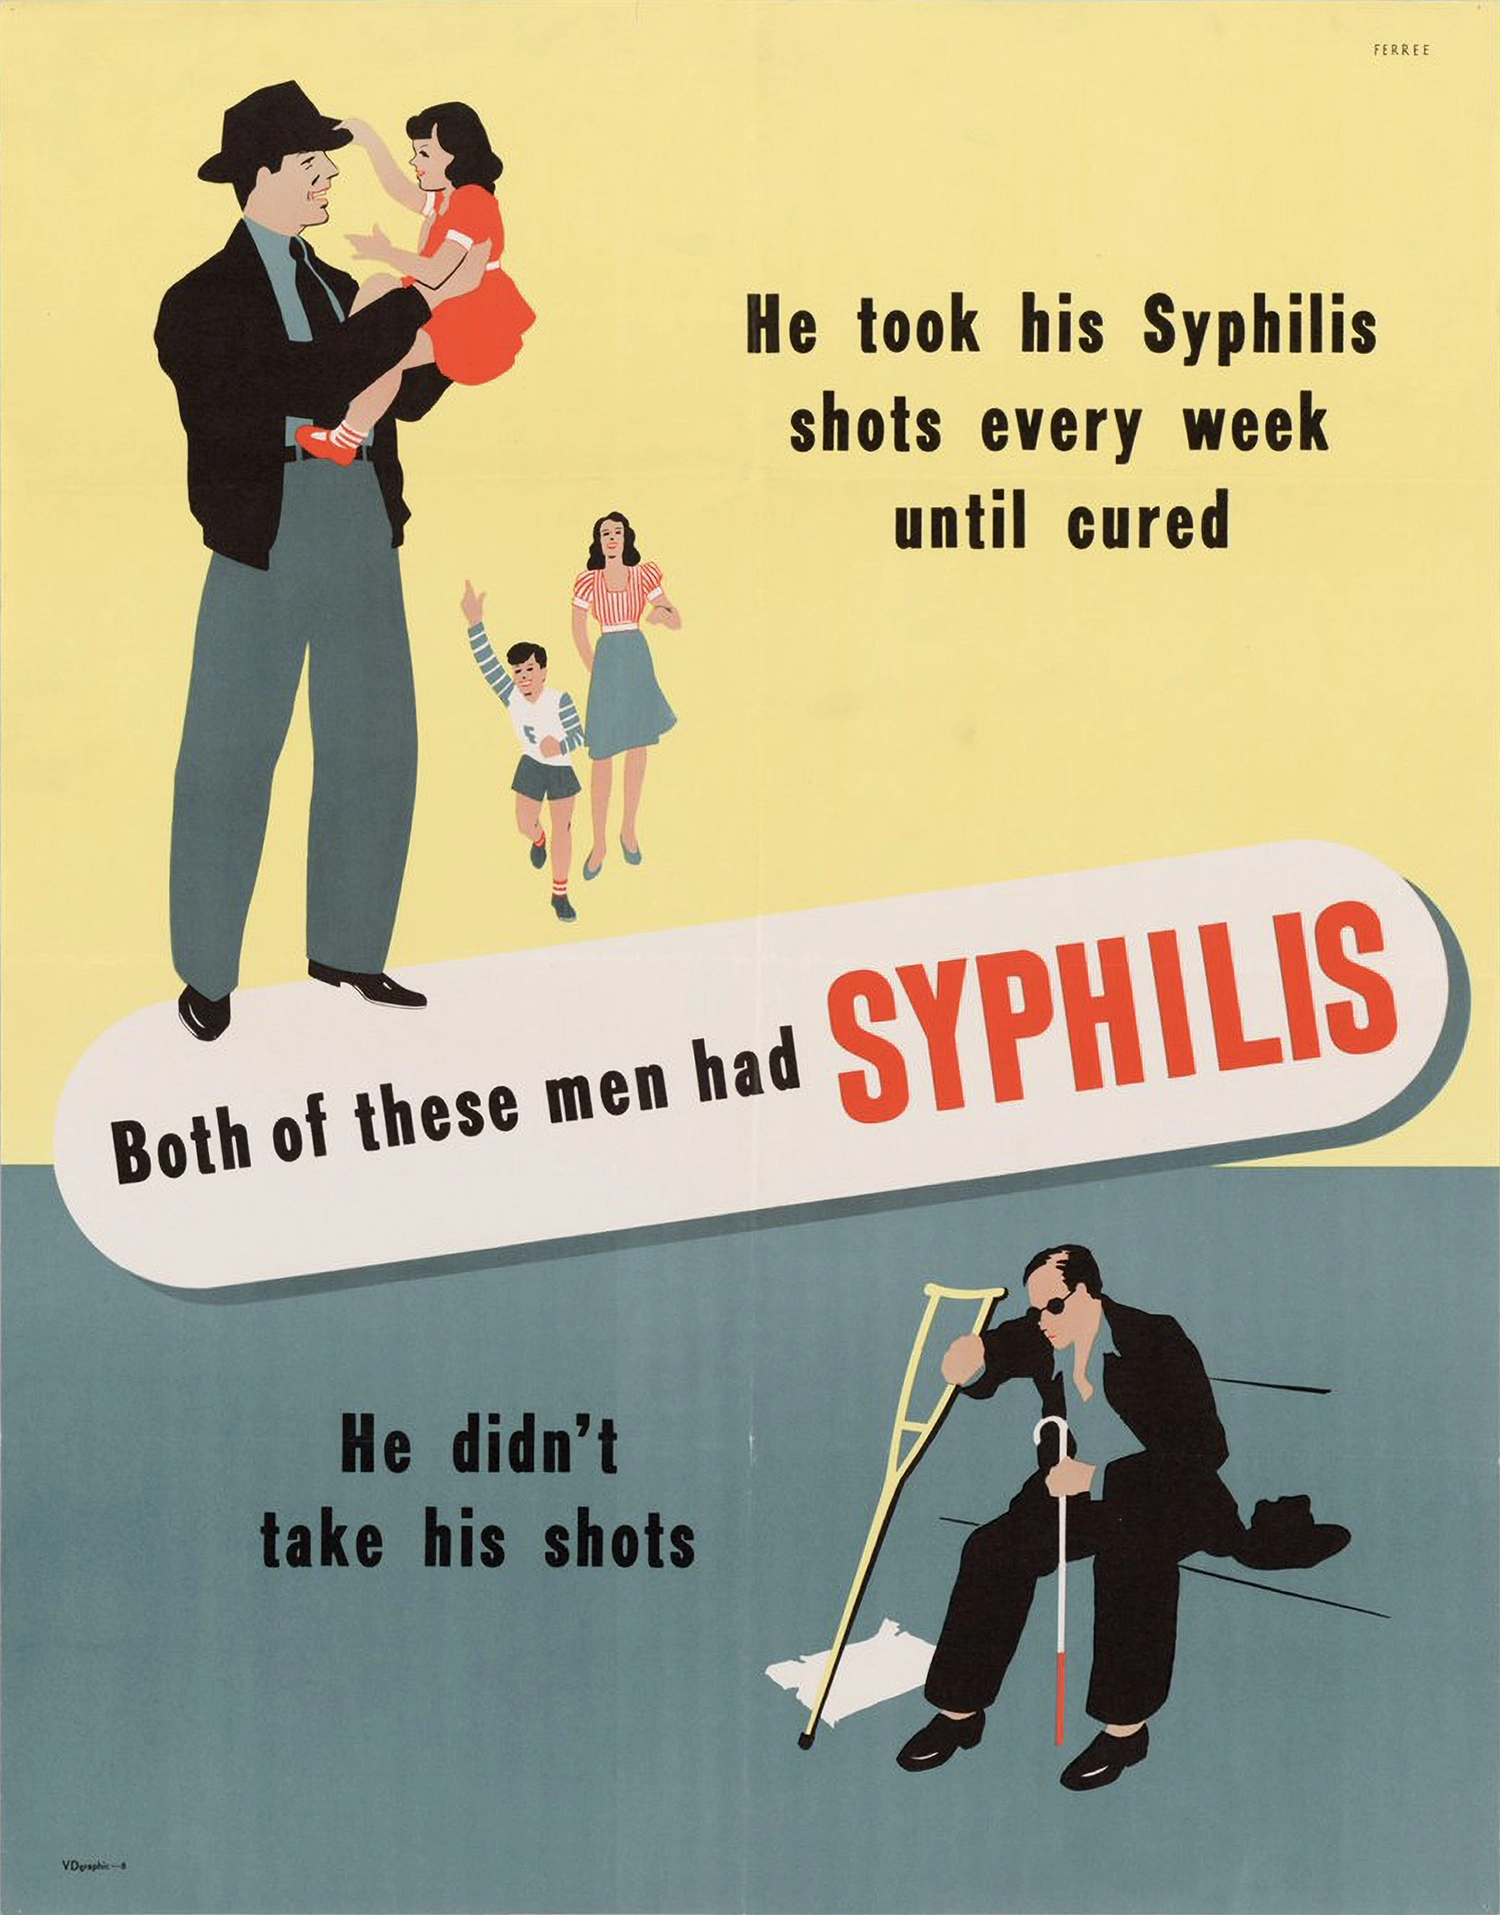 A vintage poster showing two men, between them it says “Both of these men had SYPHILIS.” One man is playing with his kid, wife and child in the background. It says “He took his Syphilis shots every week until cured.” Below a lonely man, blind and on crutches, sits alone – “he didn’t take his shots.”